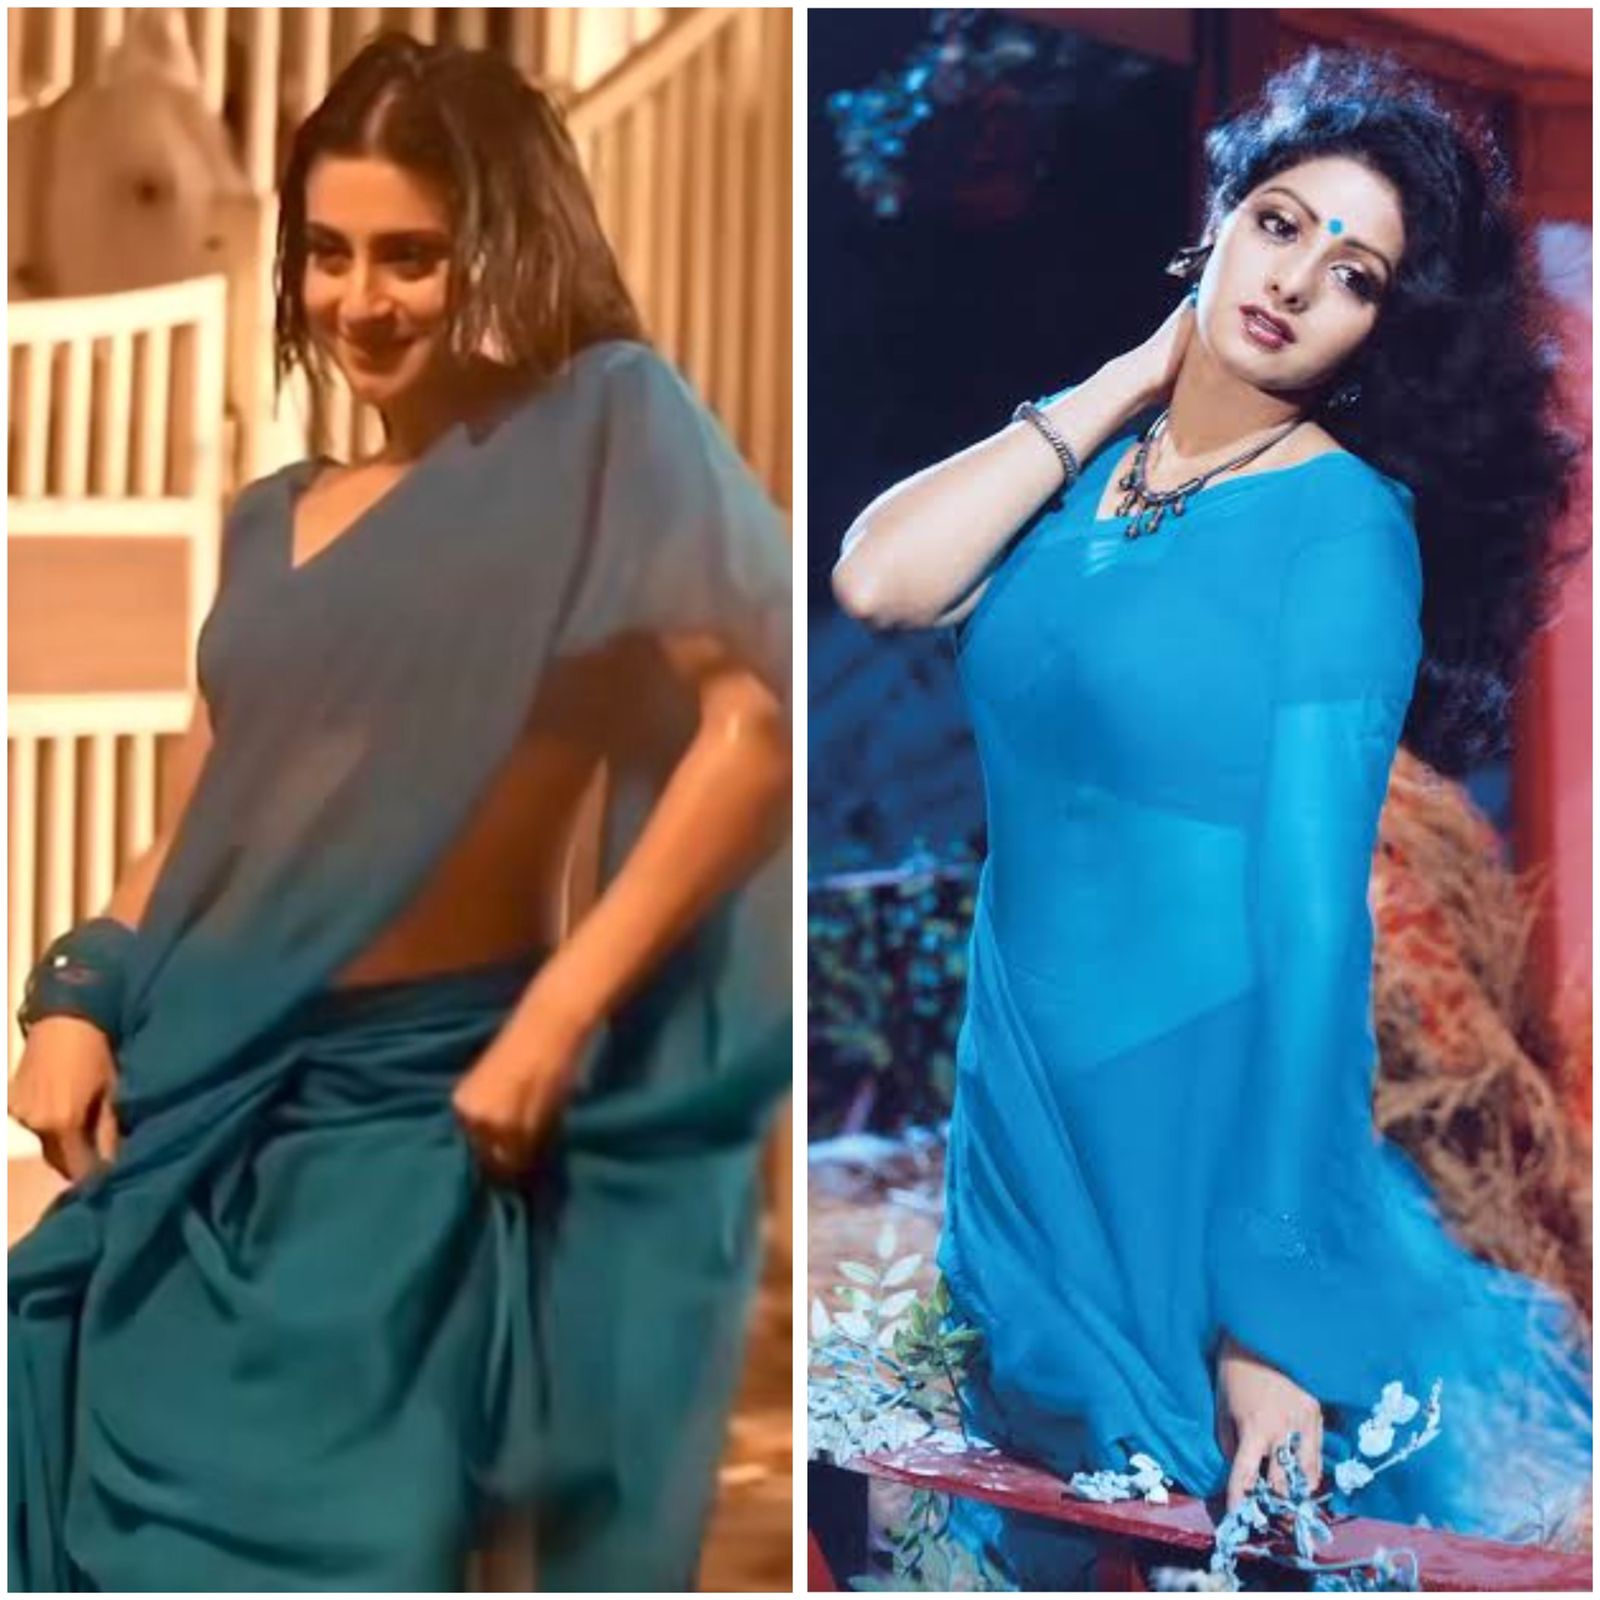 Bigg Boss 17 Fame Isha Malviya turns up the heat in a blue sari ,recreates legendary Sridevi's Iconic ‘Kaate Nahi Kat Te’ Song Look from ‘Mr India’ for her song 